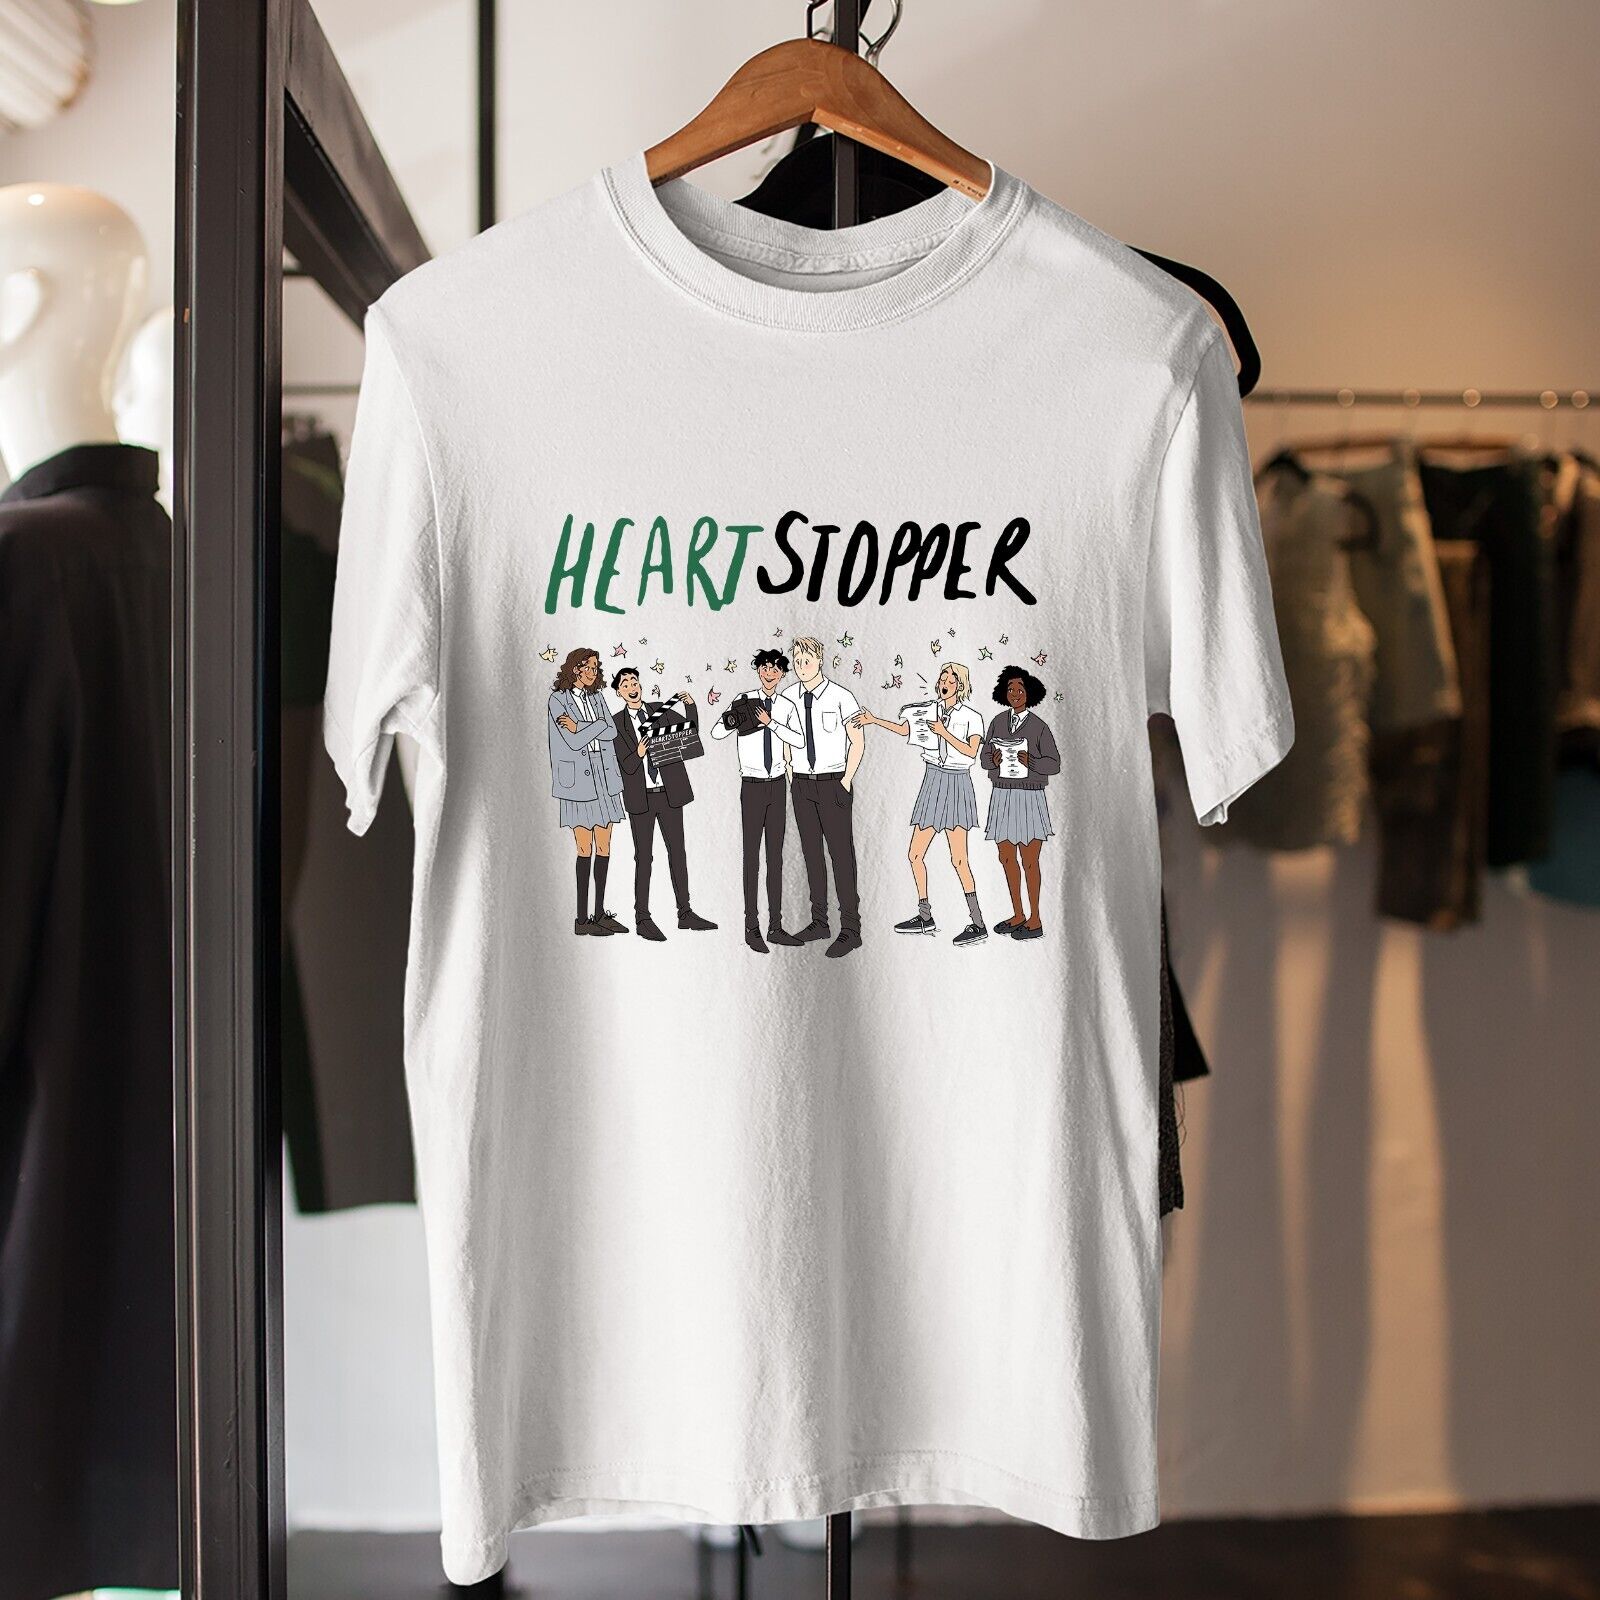 Heartstopper Merchandise Showcase: Your Source for Sweet Swag